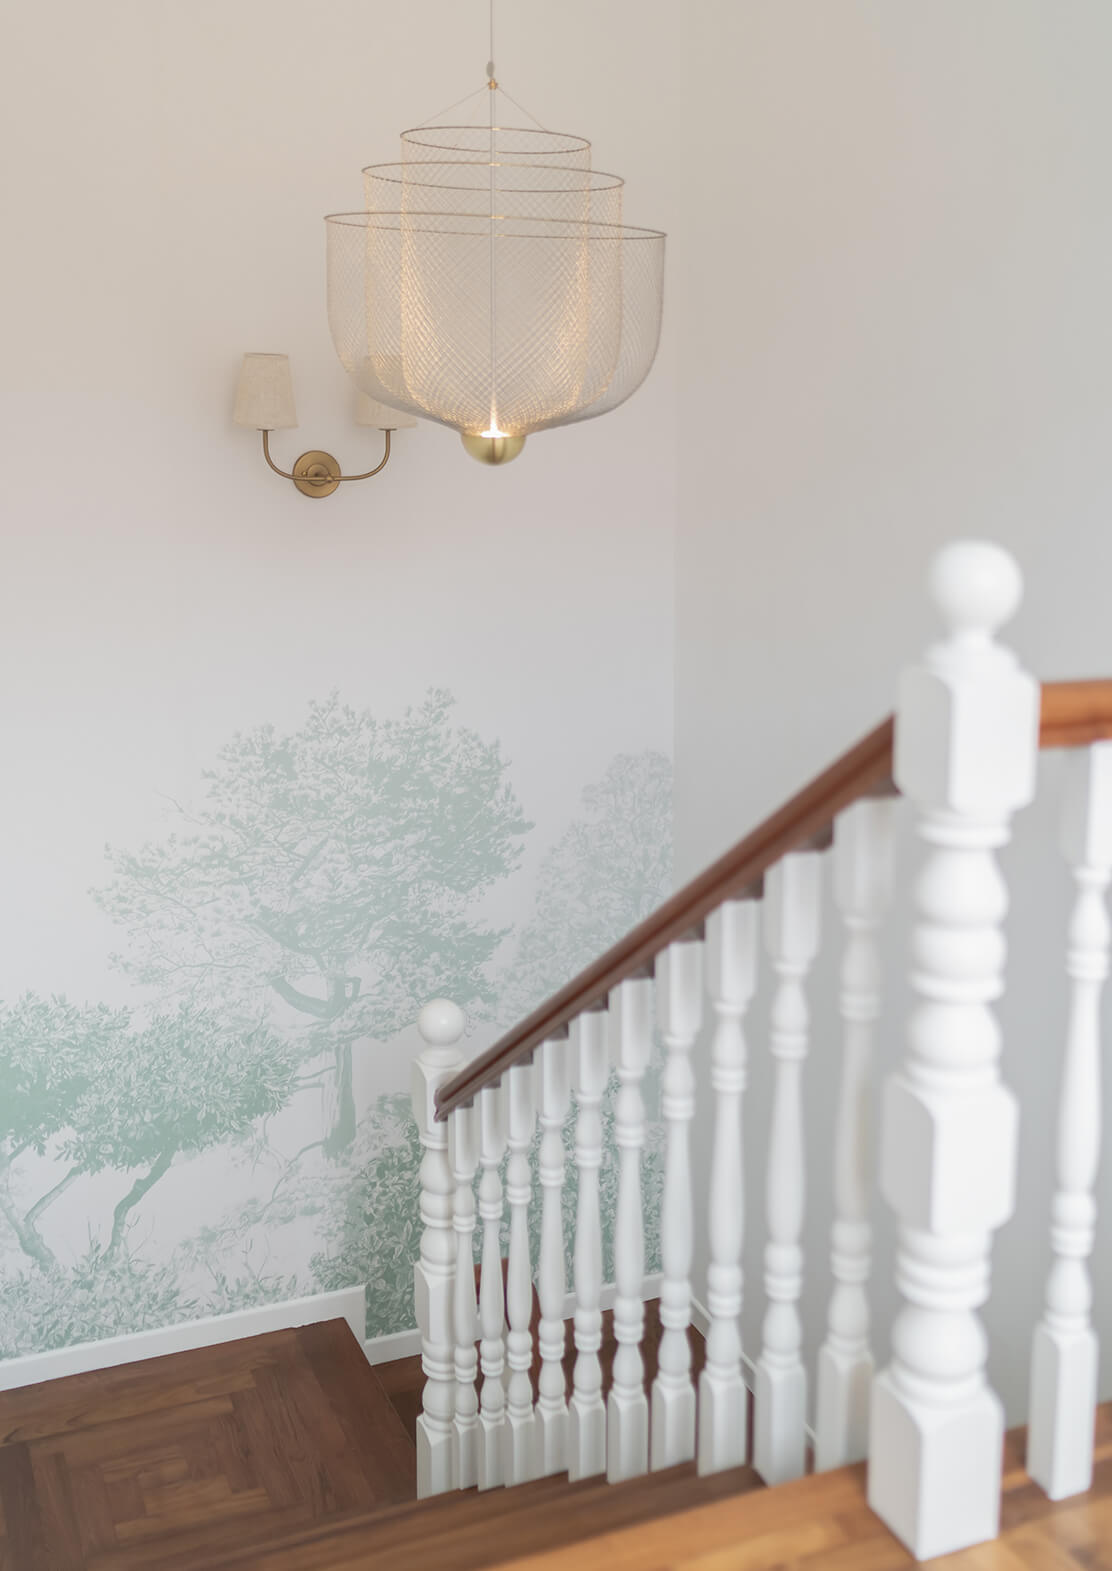 Hua Trees Wallpaper Mural by Sian Zeng in staircase by Priscilla Tan